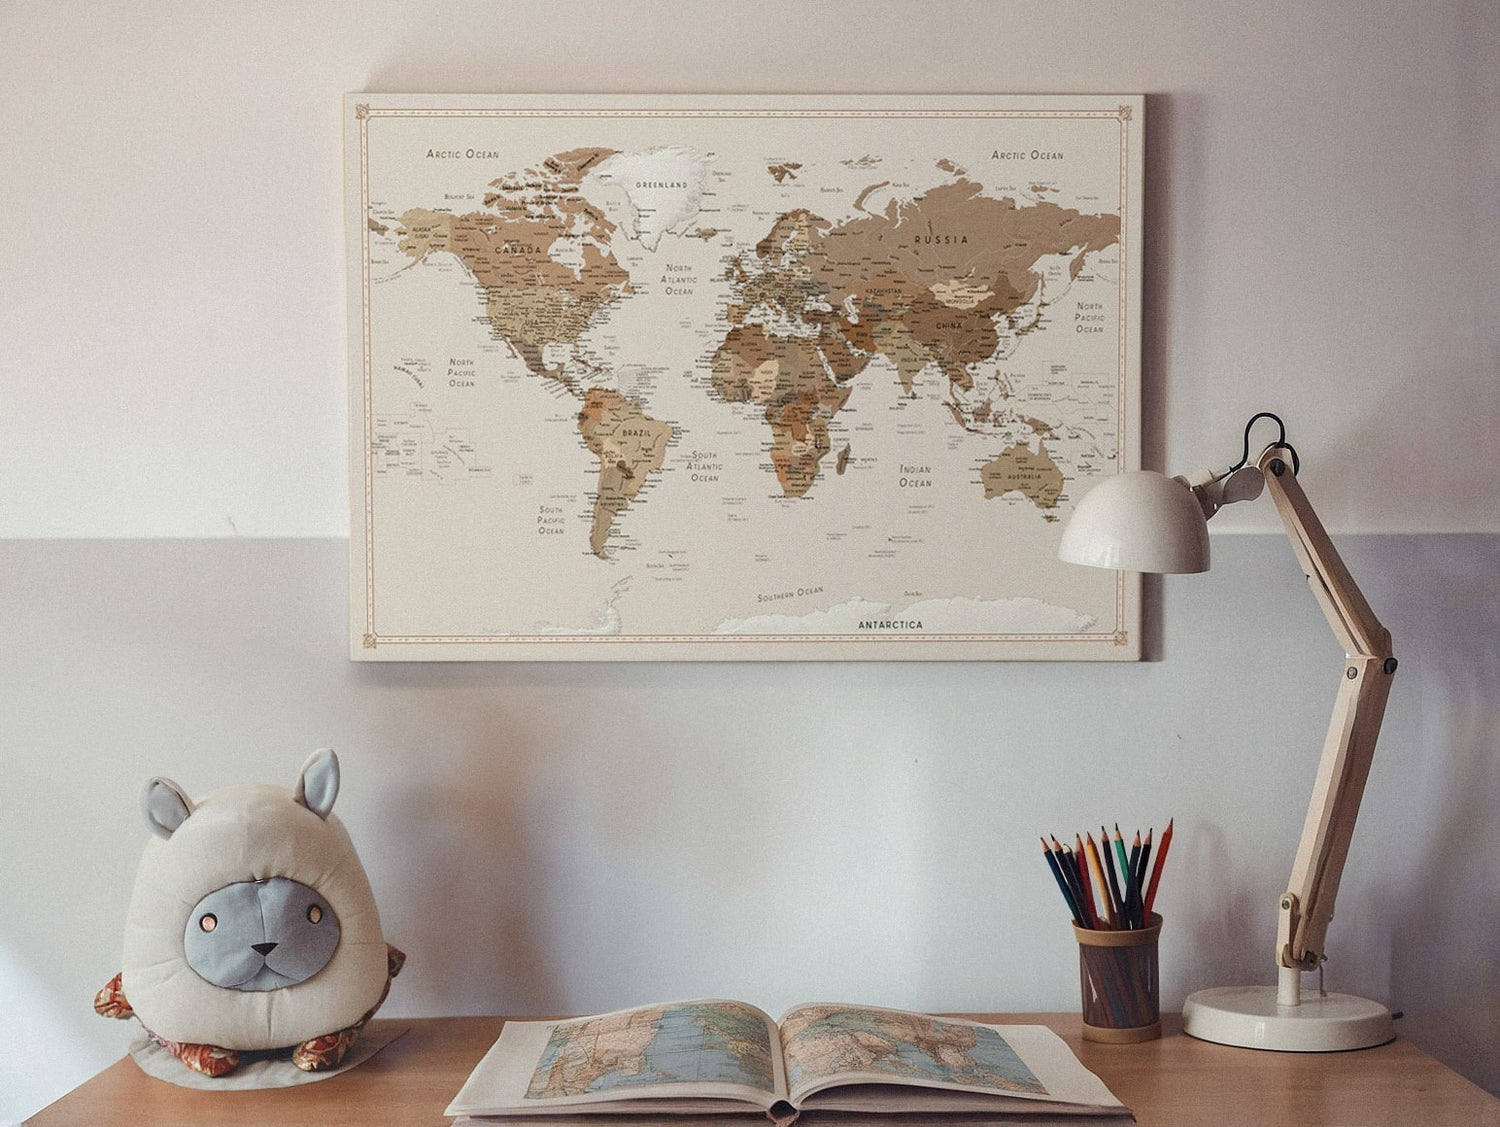 A beautifully framed adventure travel map on a wall, perfect for travellers to pin their journeys. This push pin travel map serves as a stylish and personalised decor piece.